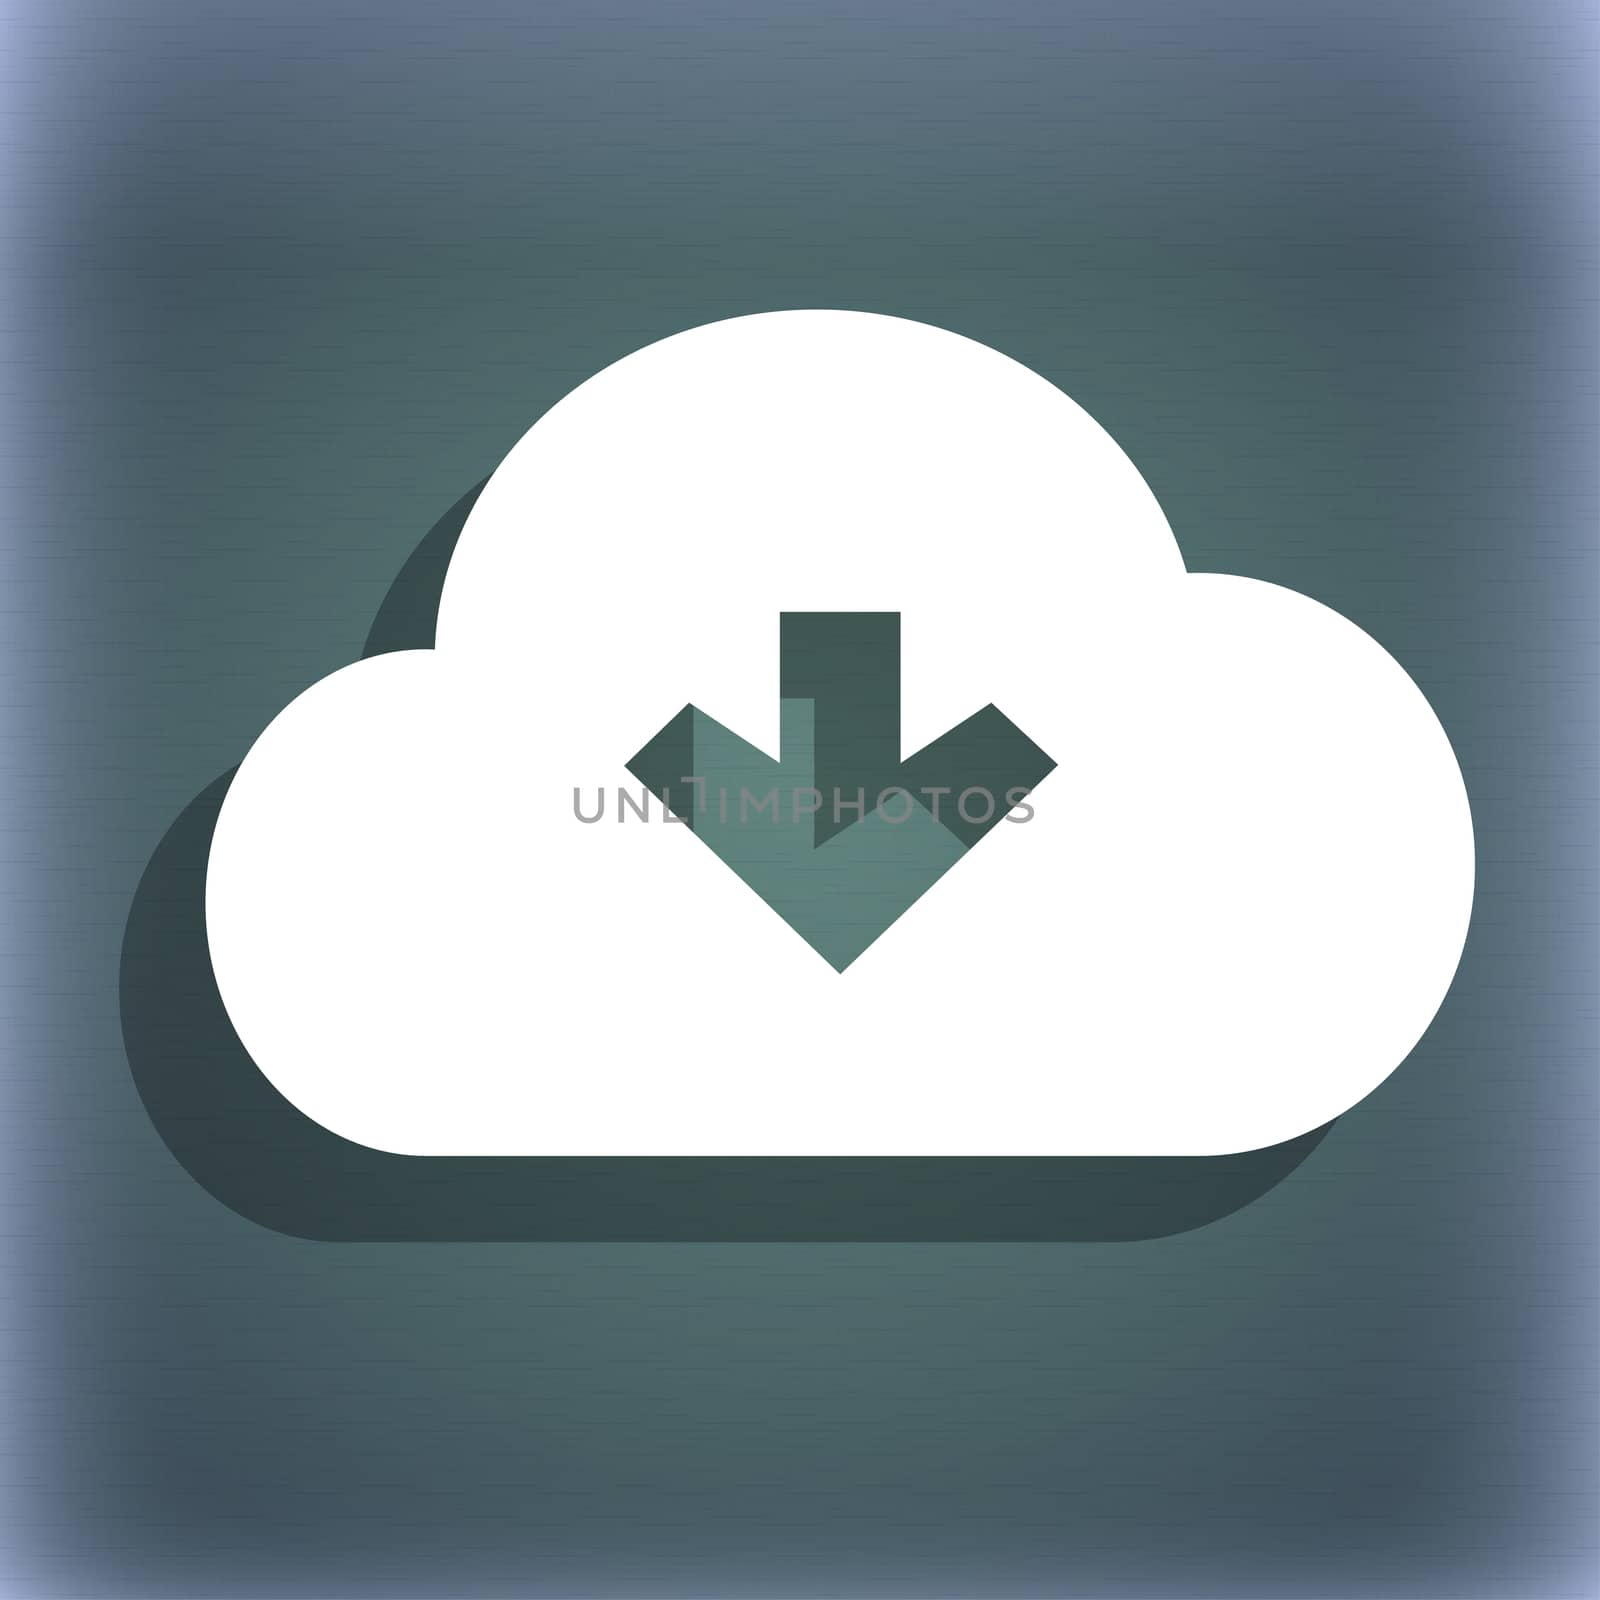 Download from cloud icon symbol on the blue-green abstract background with shadow and space for your text. illustration